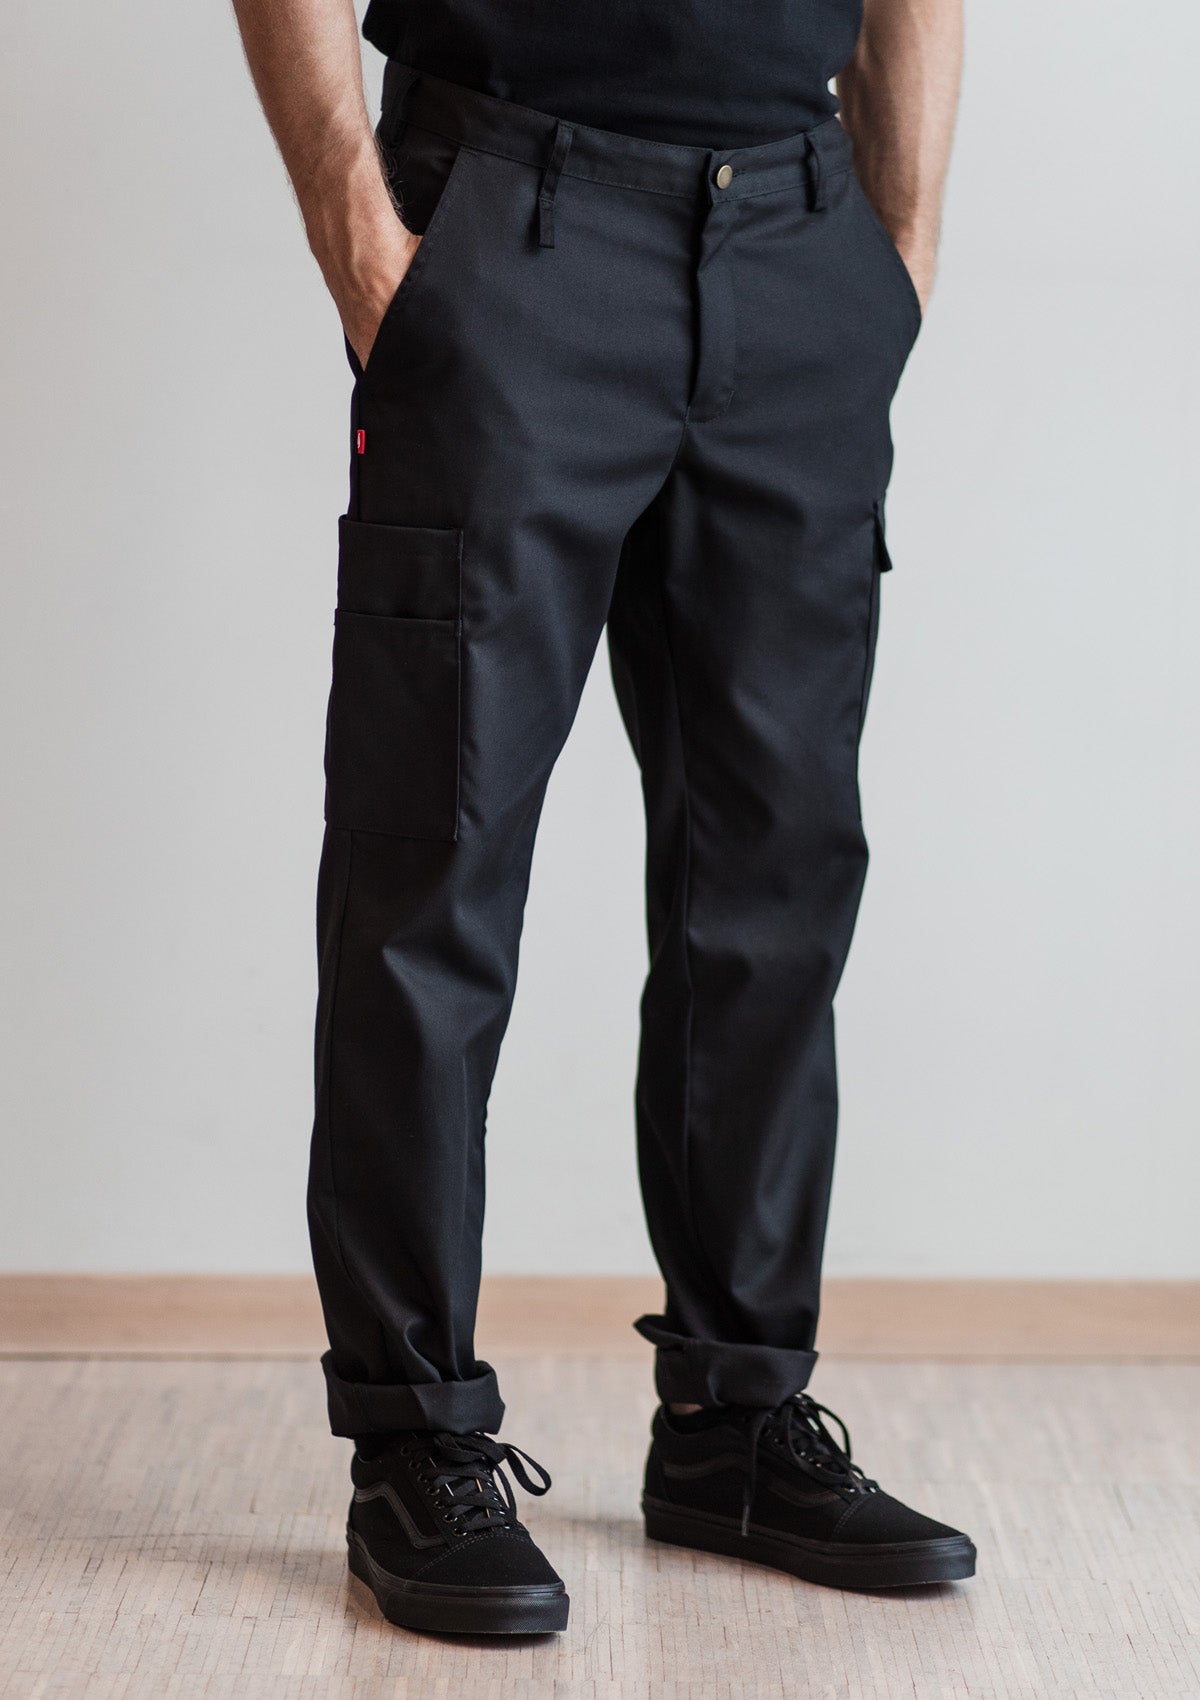 Men's Chef Pants with Smooth Front